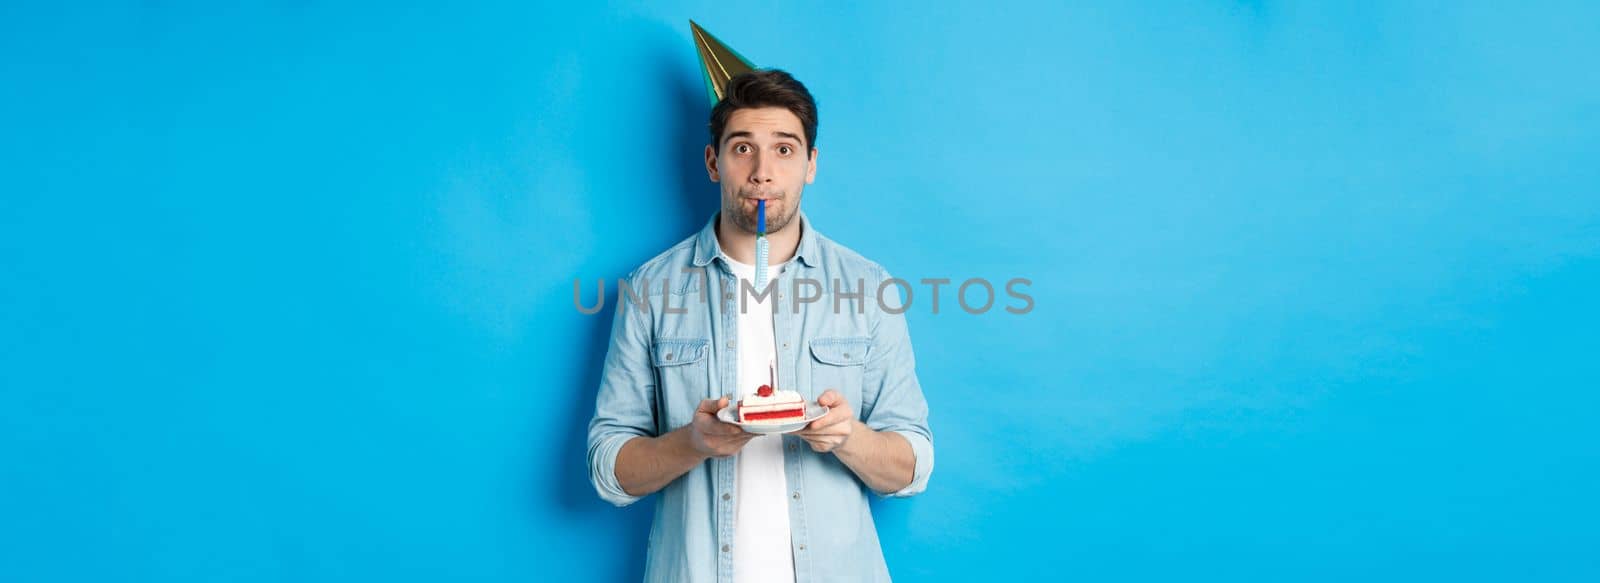 Handsome young man holding birthday cake, wearing party hat and blowing whistle, standing over blue background.